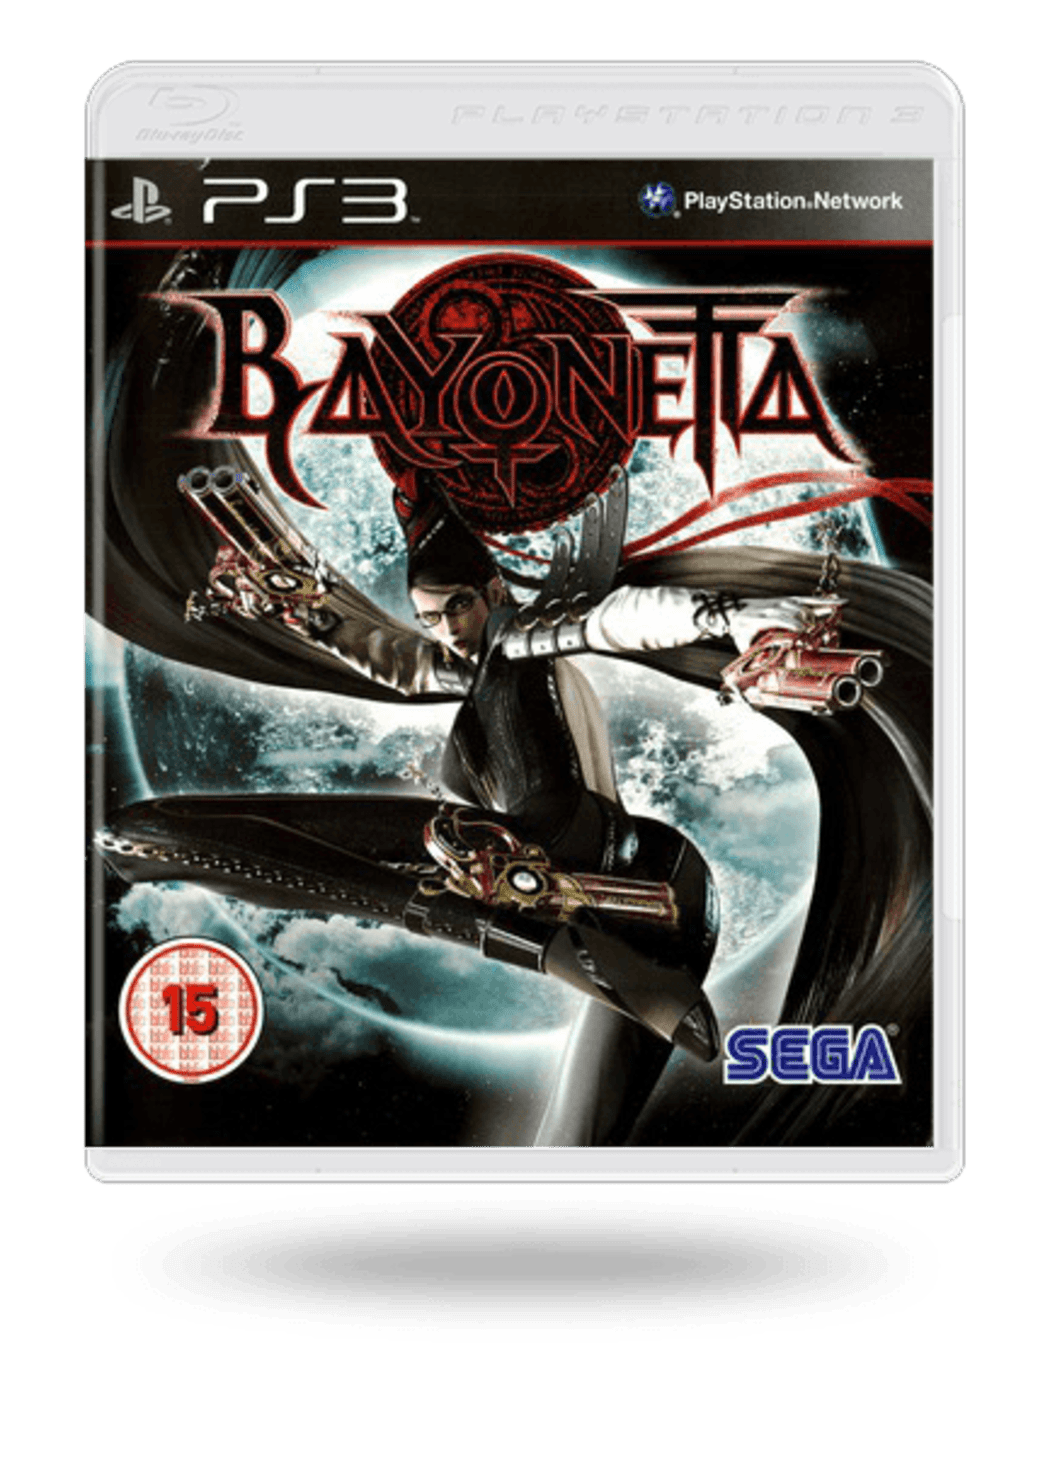 Bayonetta PlayStation 3 PS3 Game For Sale